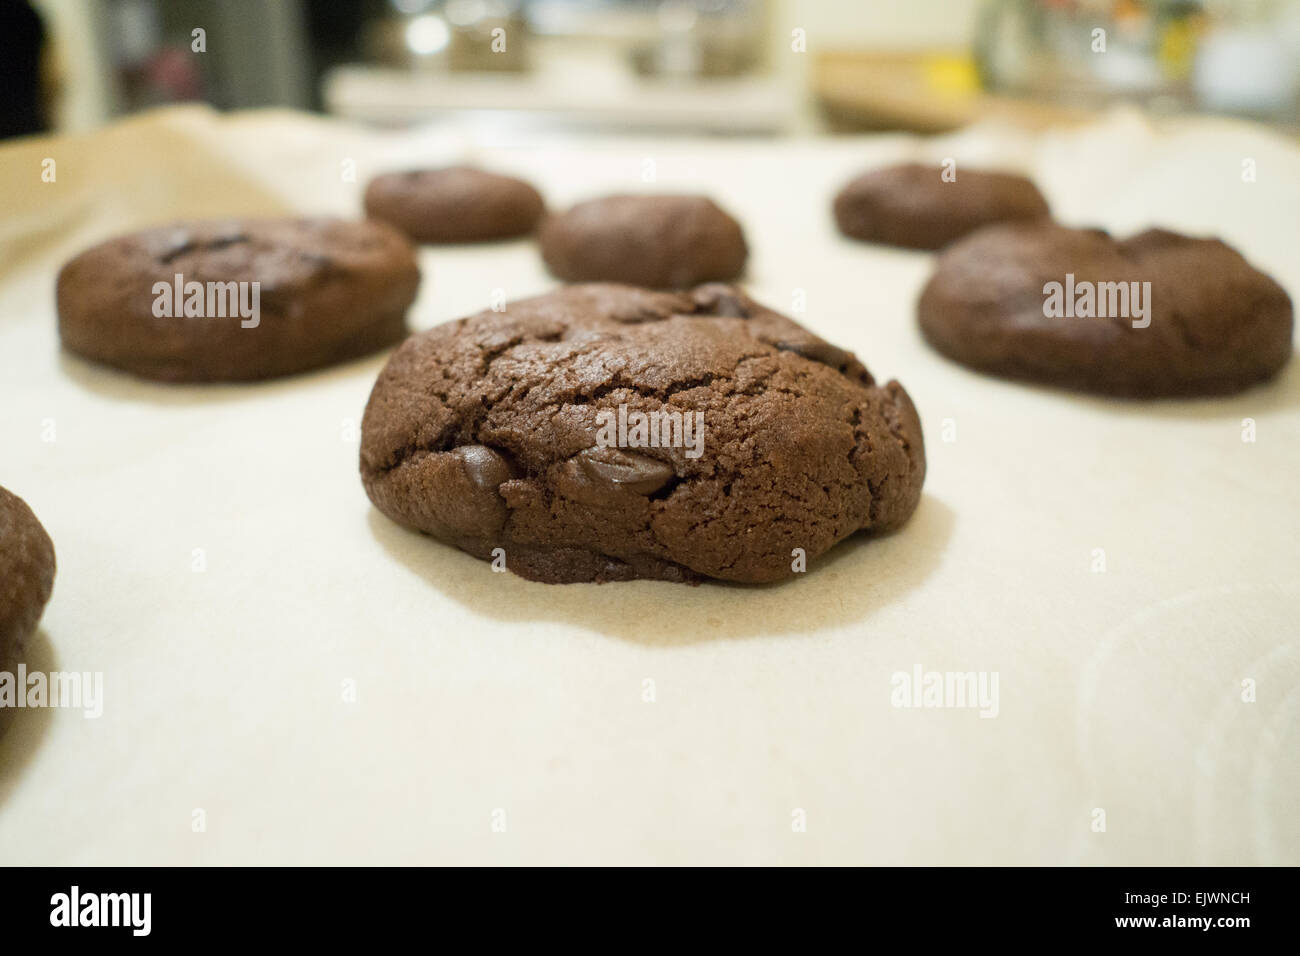 baked chocolate chip cookies home made Stock Photo